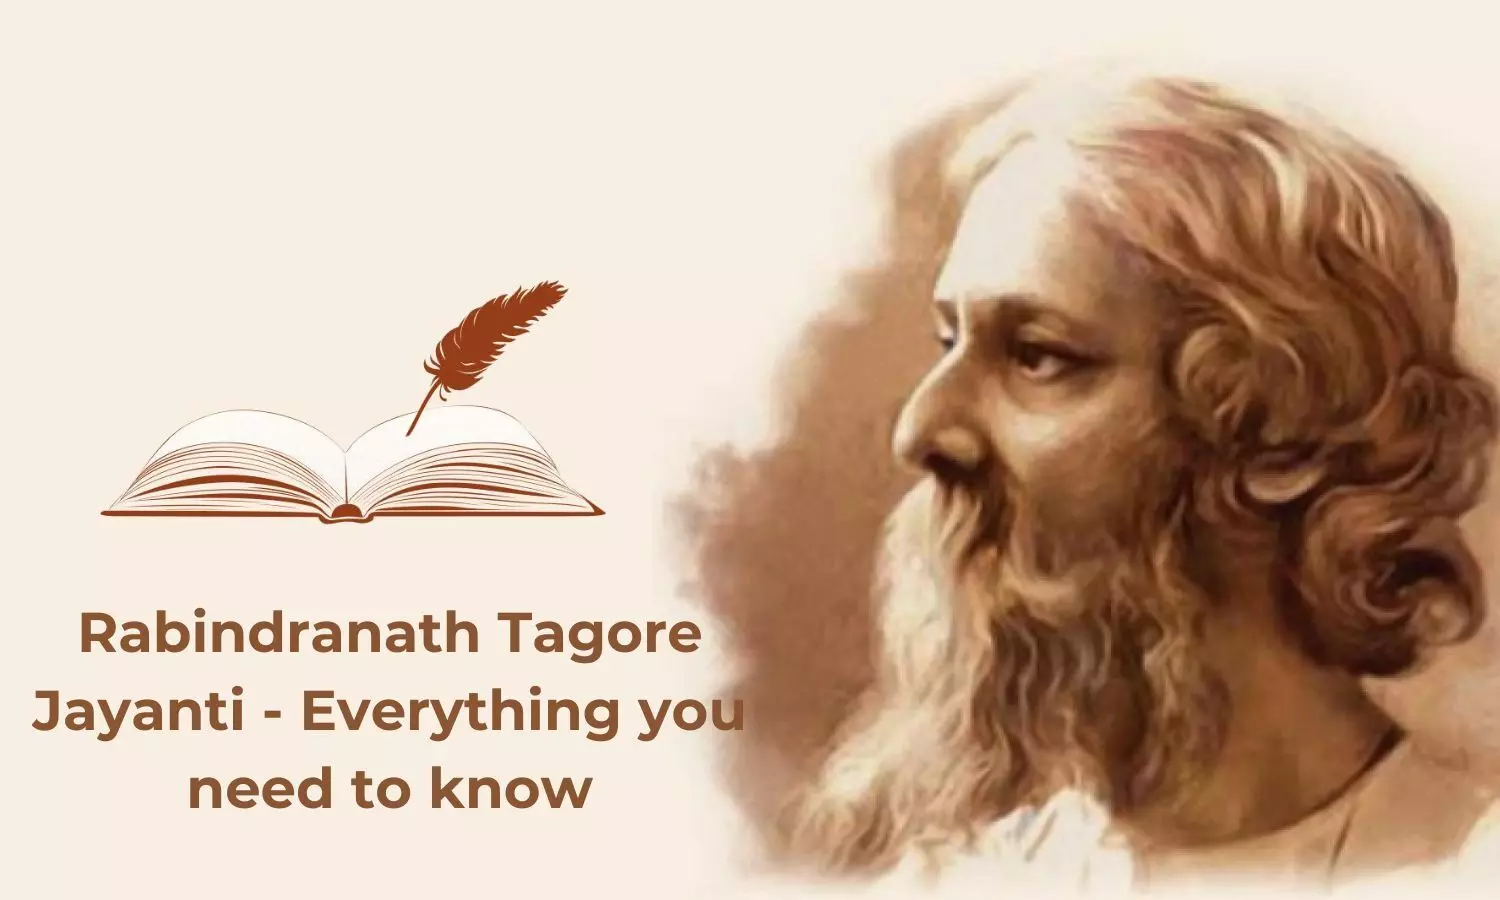 Rabindranath Tagore Jayanti - Everything you need to know